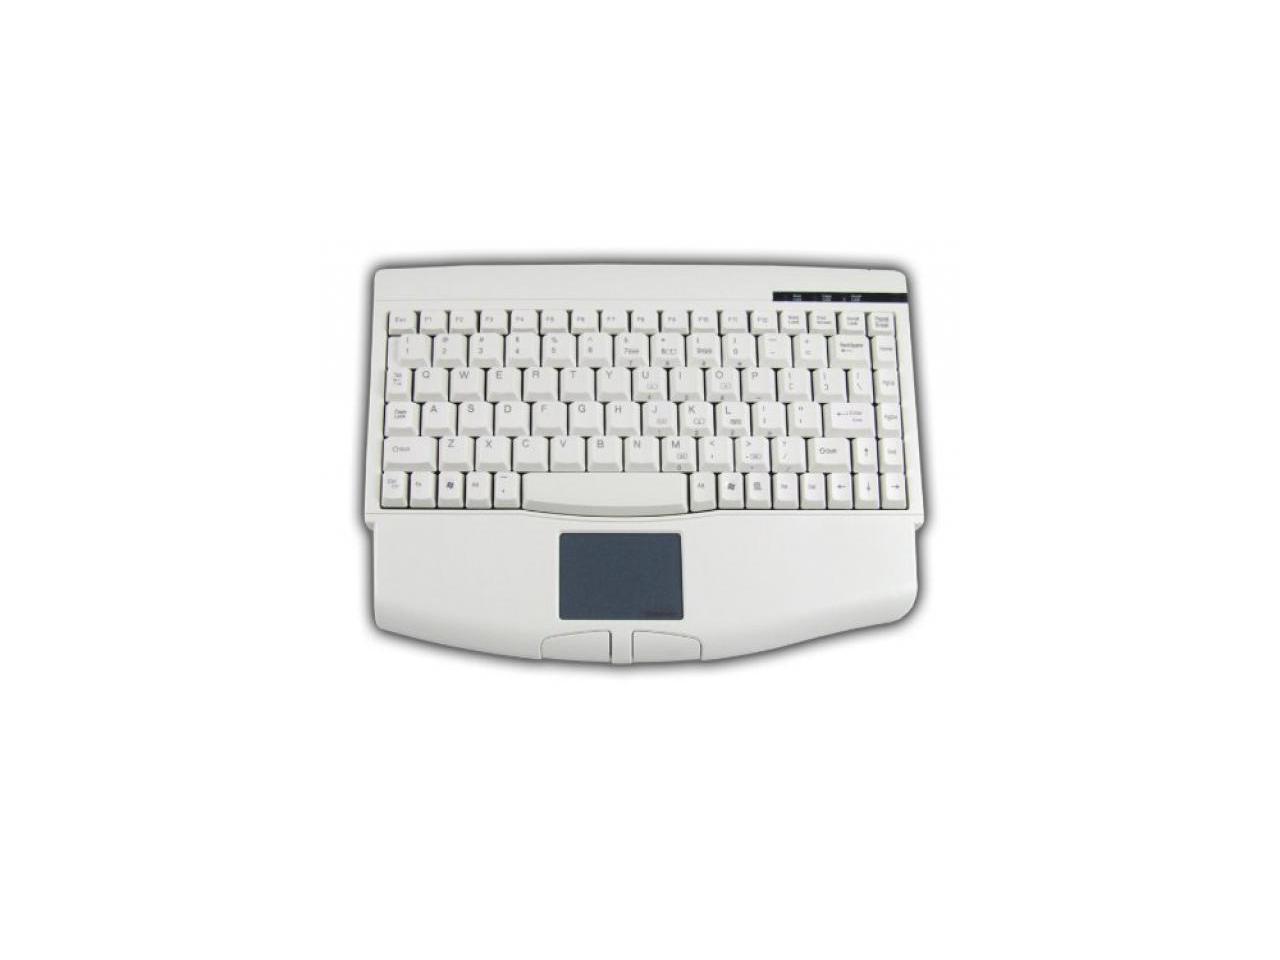 Adesso Mini Touchpad USB Keyboard for Windows with Wrist Rest (ACK-540UW)